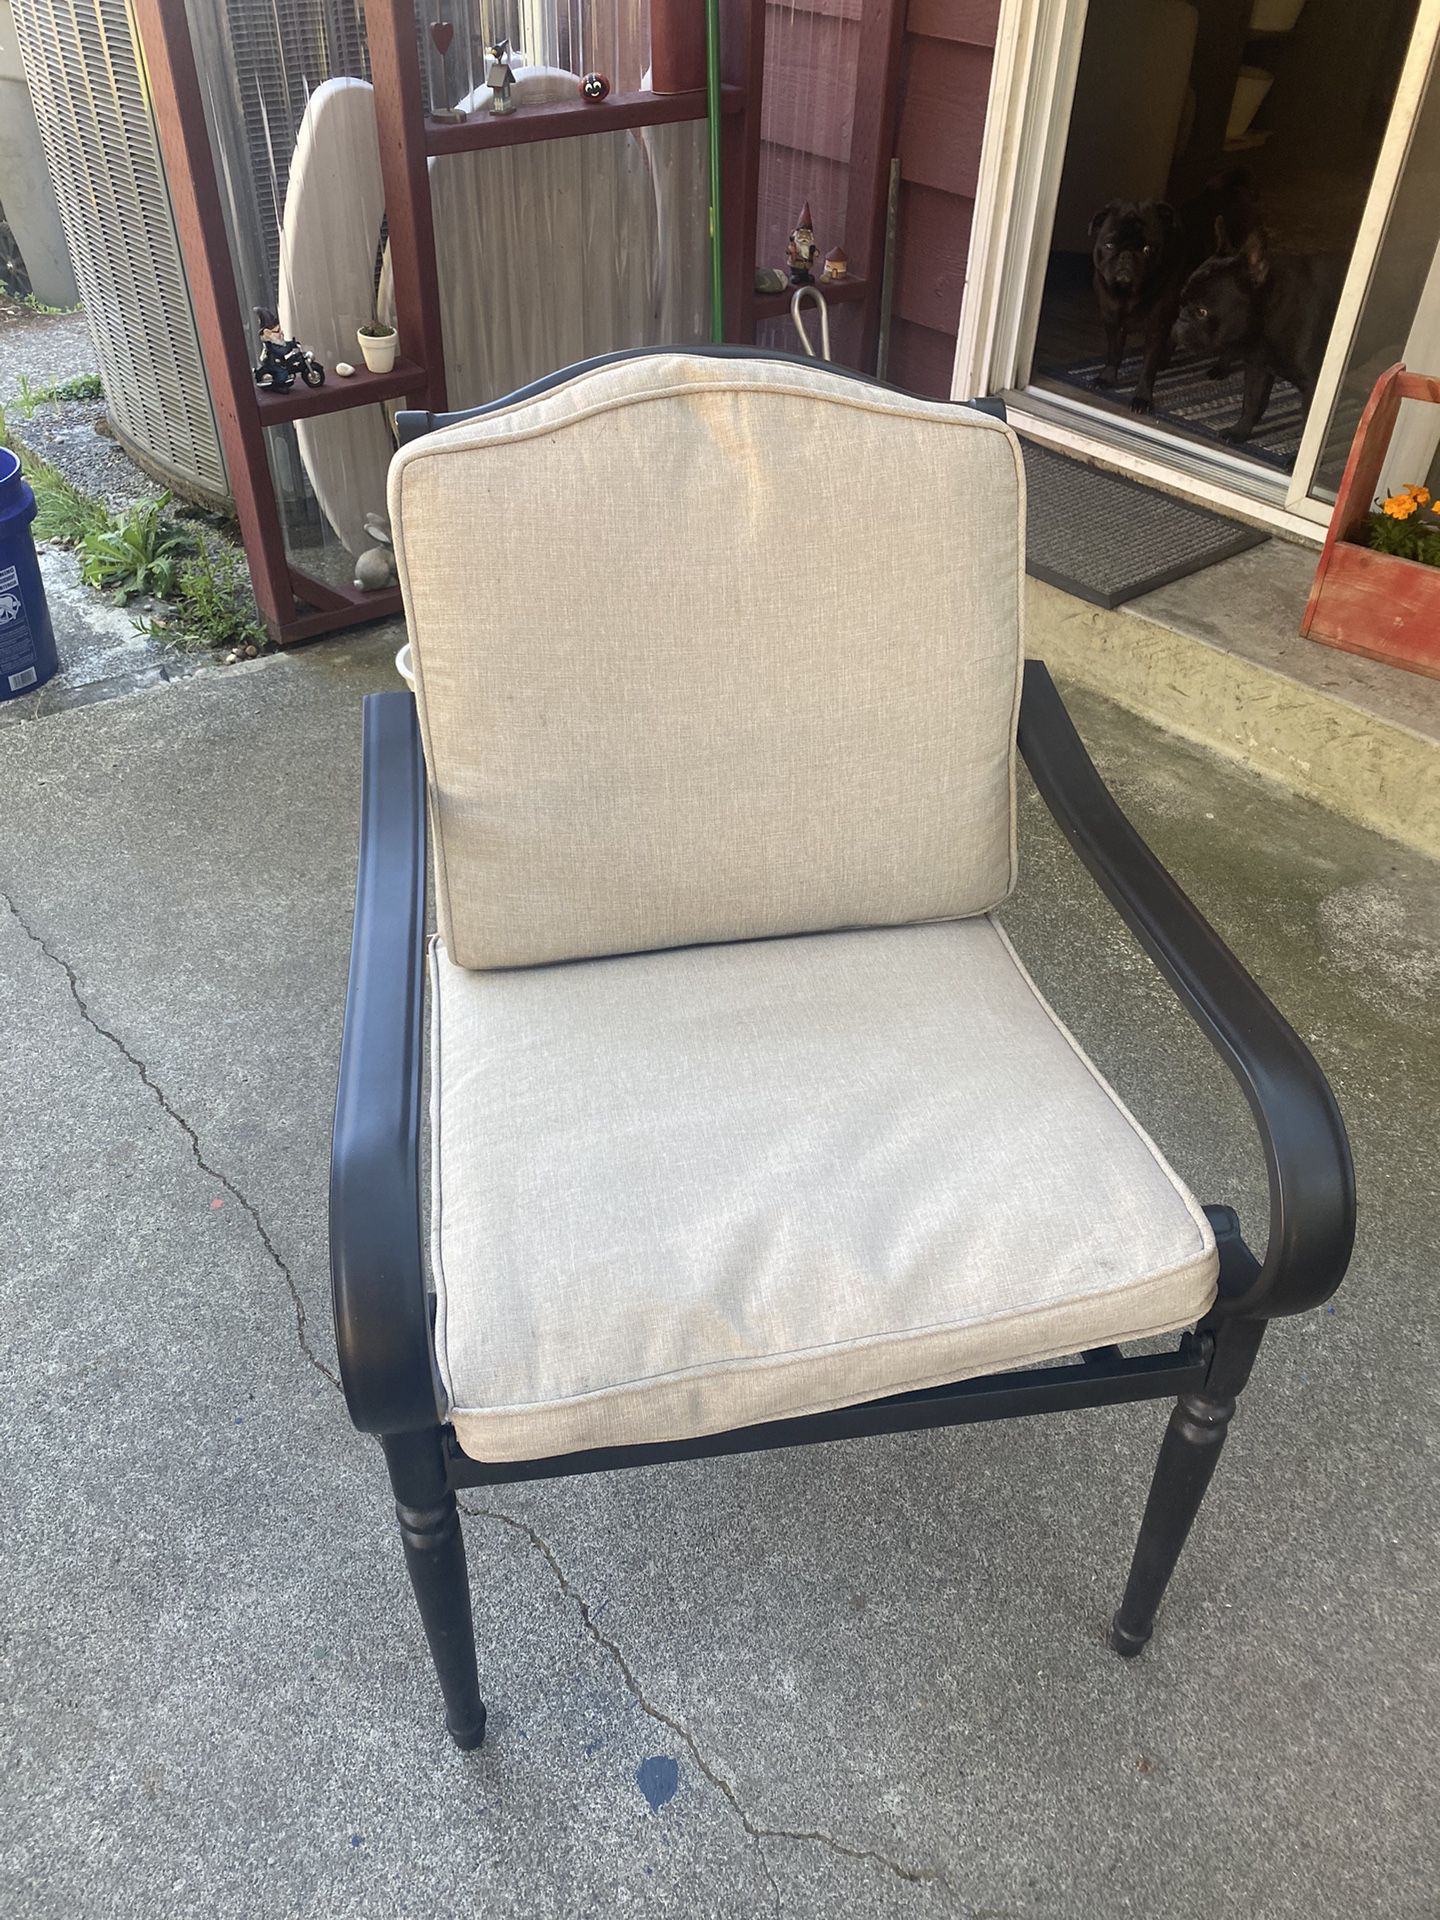 Free Cushions For Six Chairs